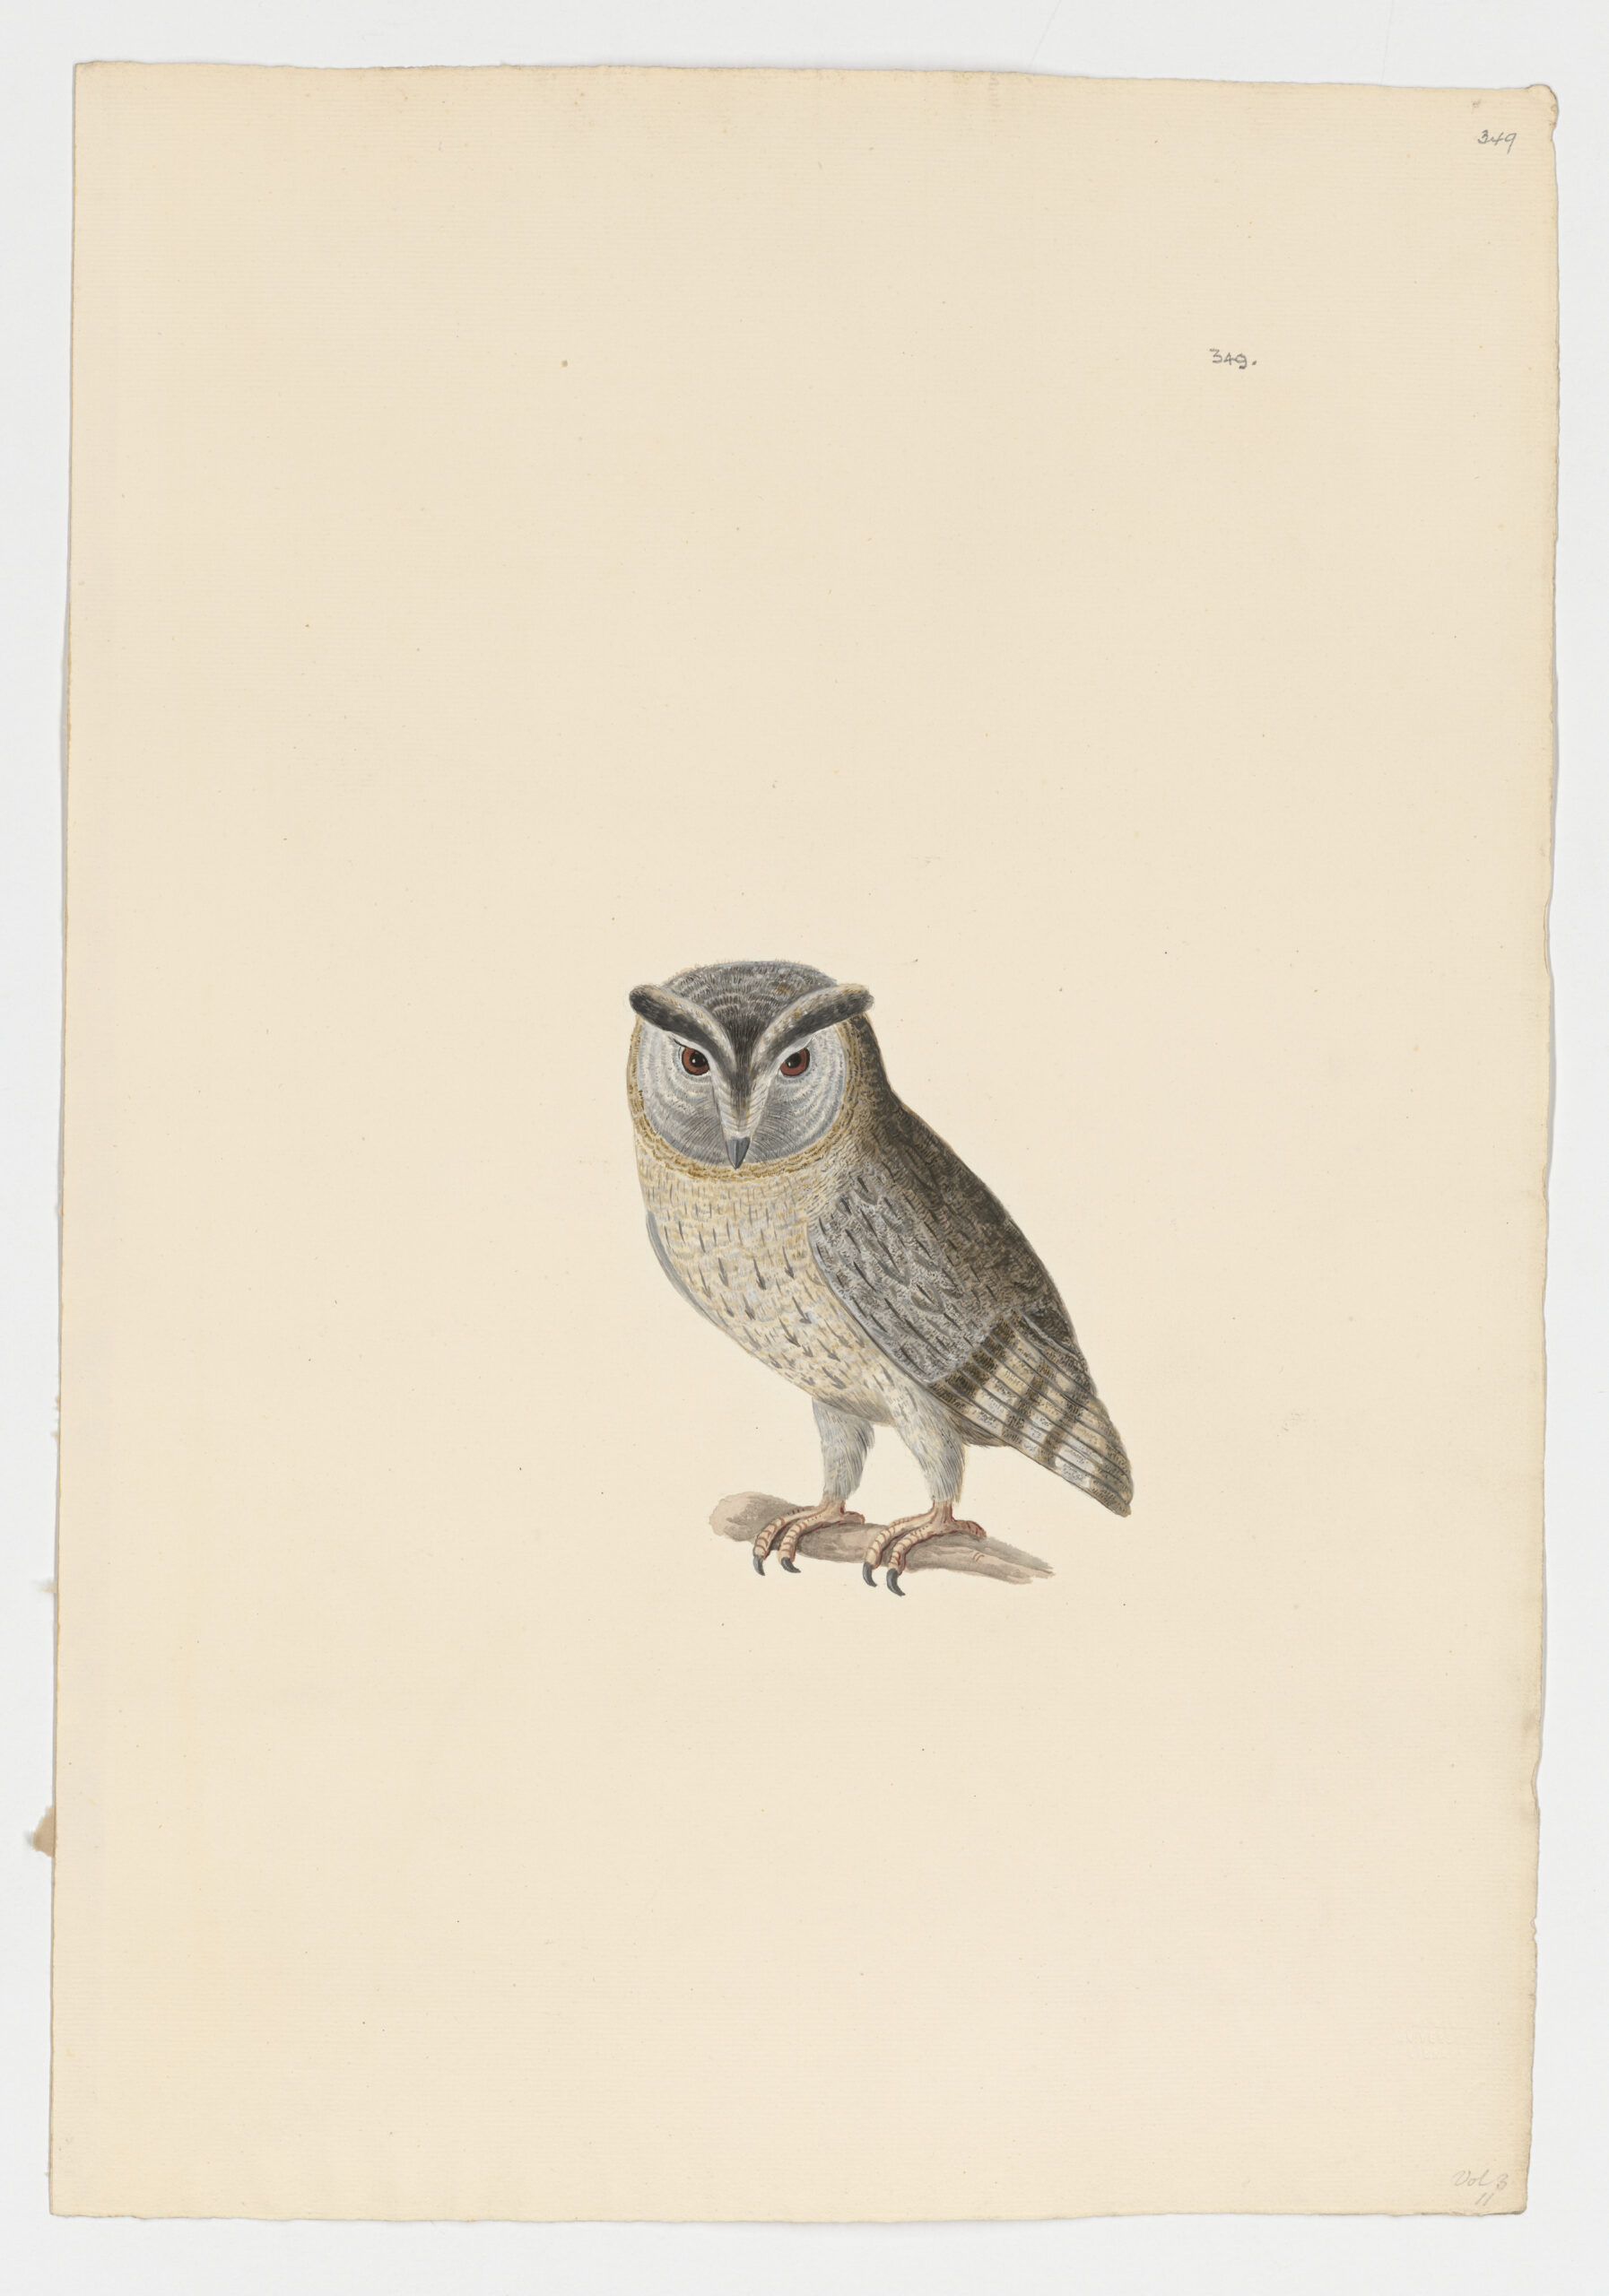 Indian Scops Owl (Otus bakkamoena), watercolour by Peter Paillou, undated. Taylor White Collection: MSG BW002, item 349. Blacker Wood Collection, Rare Books & Special Collections, McGill Library.